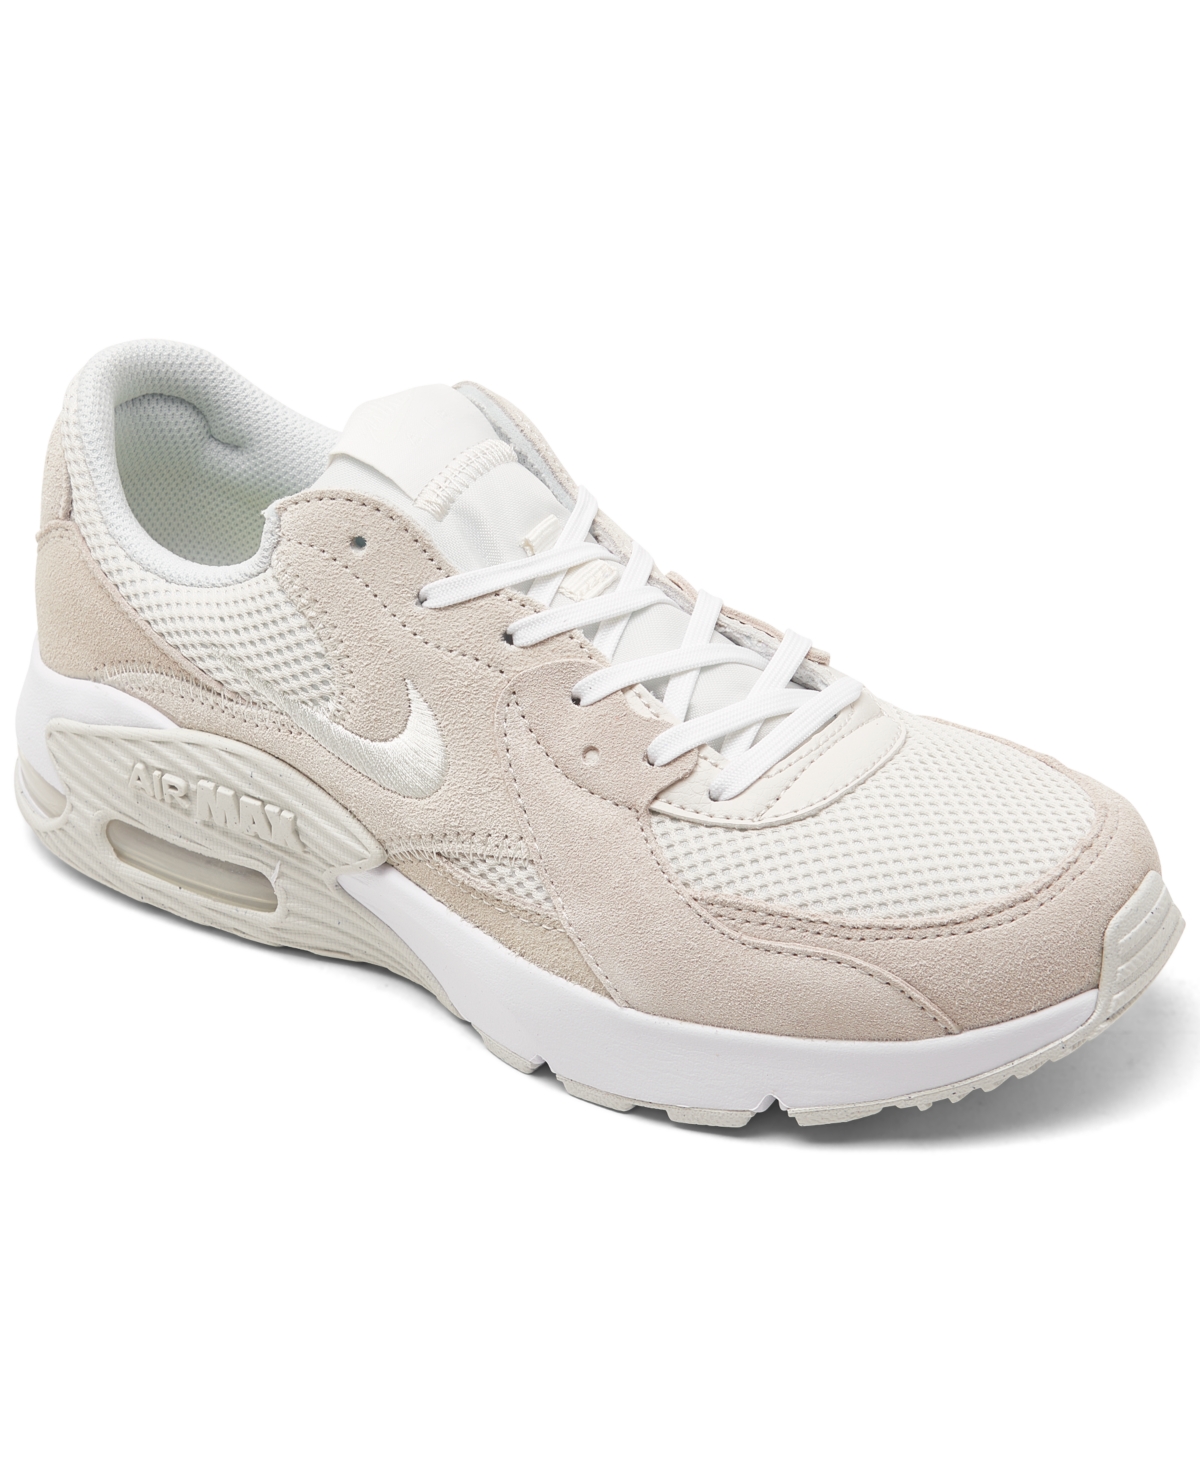 Women's Air Max Excee Casual Sneakers from Finish Line - Phantom, Platinum Tint, White